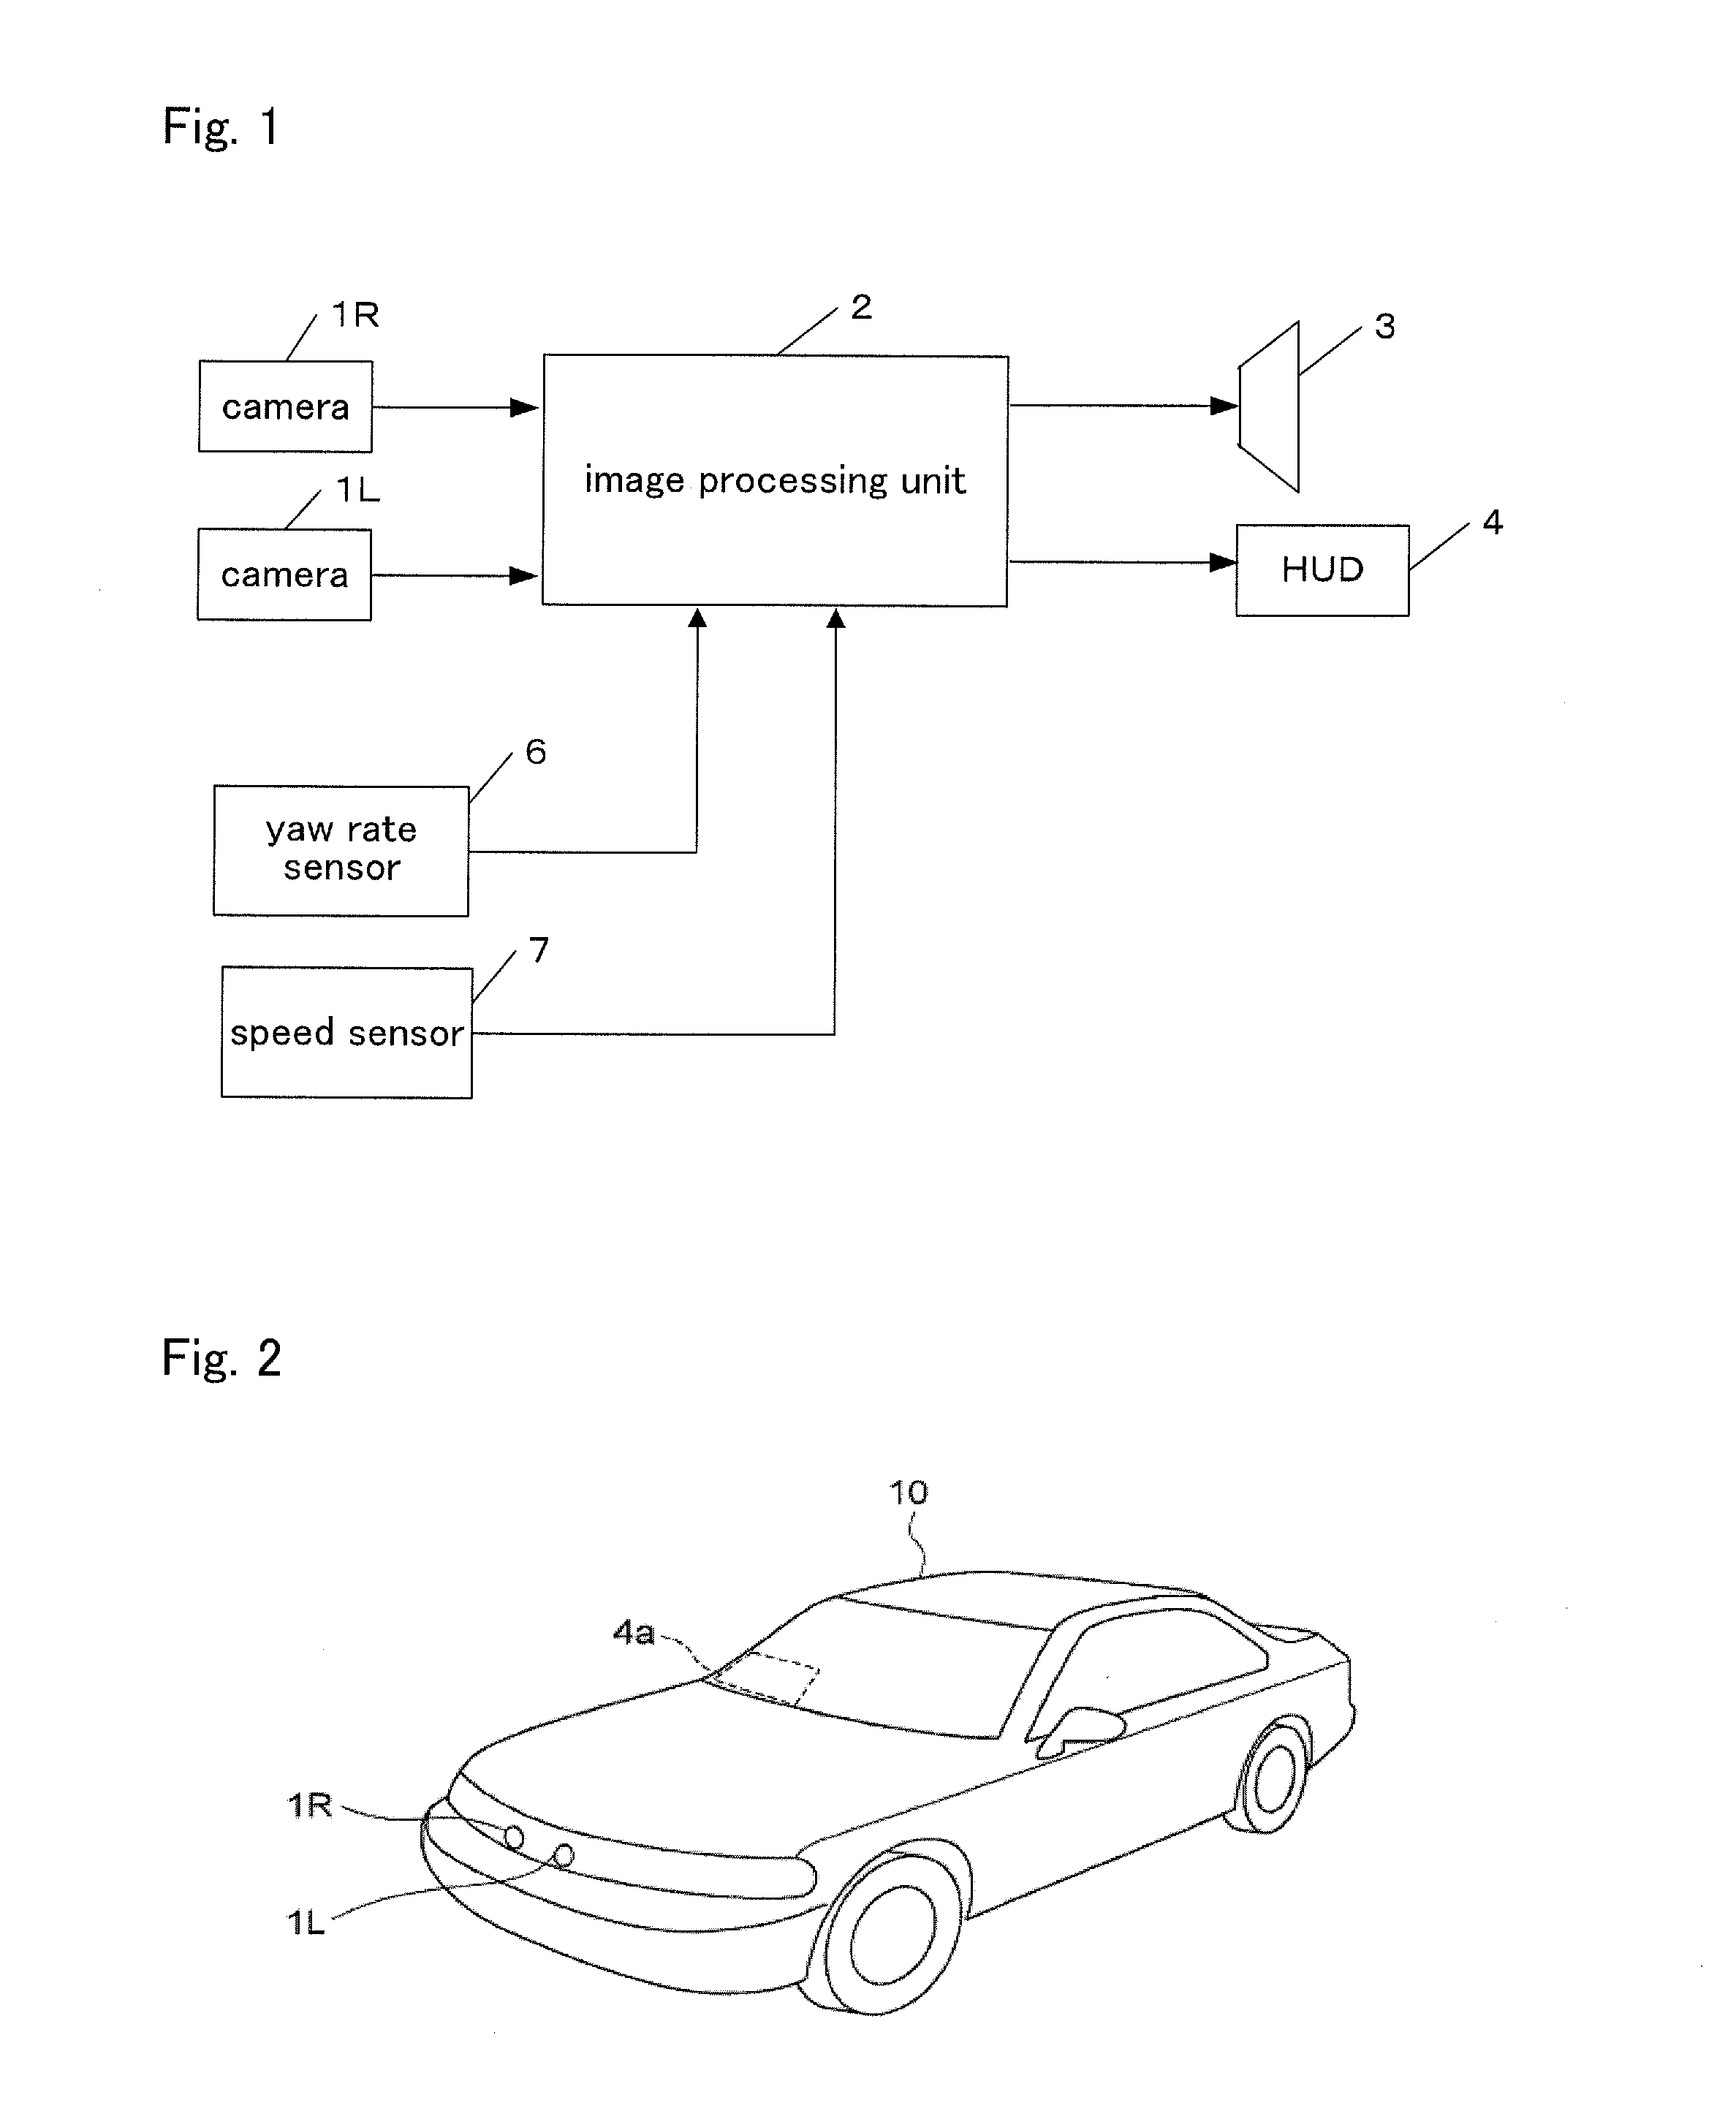 Surrounding area monitoring device for vehicle